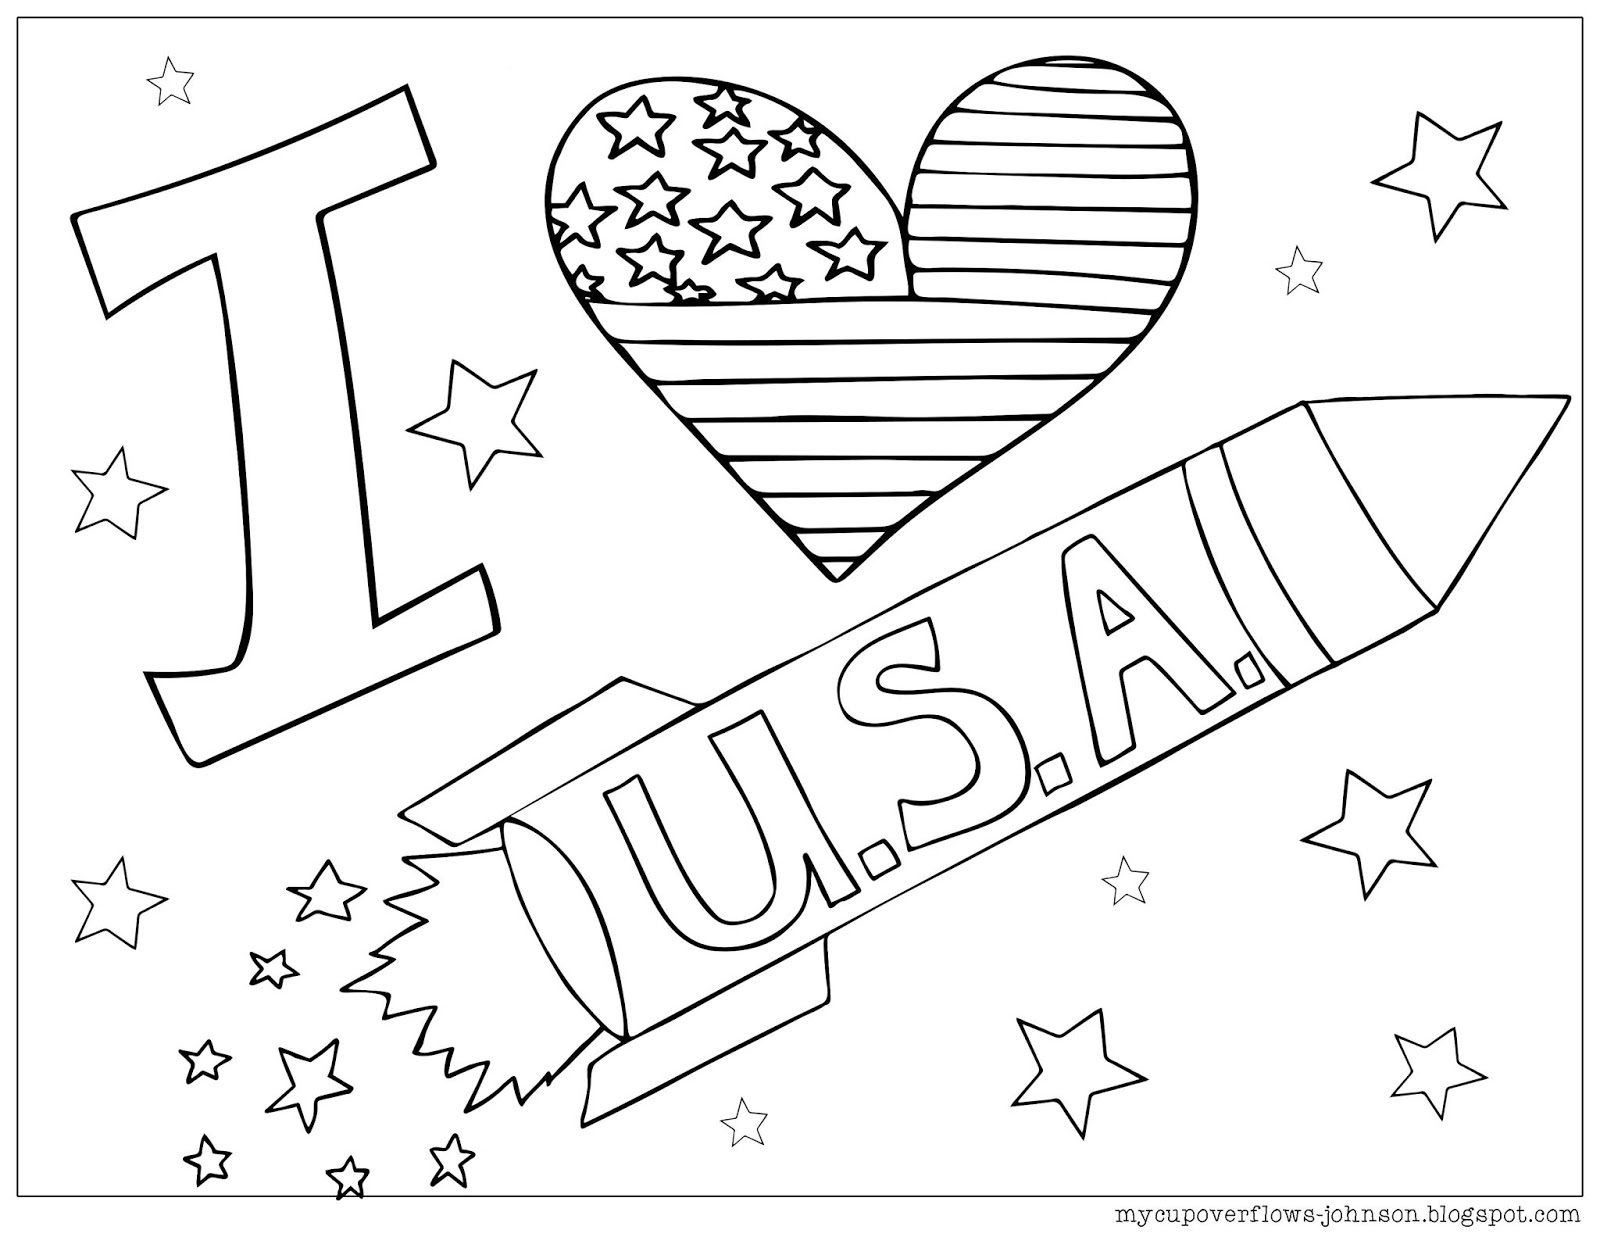 My Cup Overflows: Coloring Pages for the 4th of July